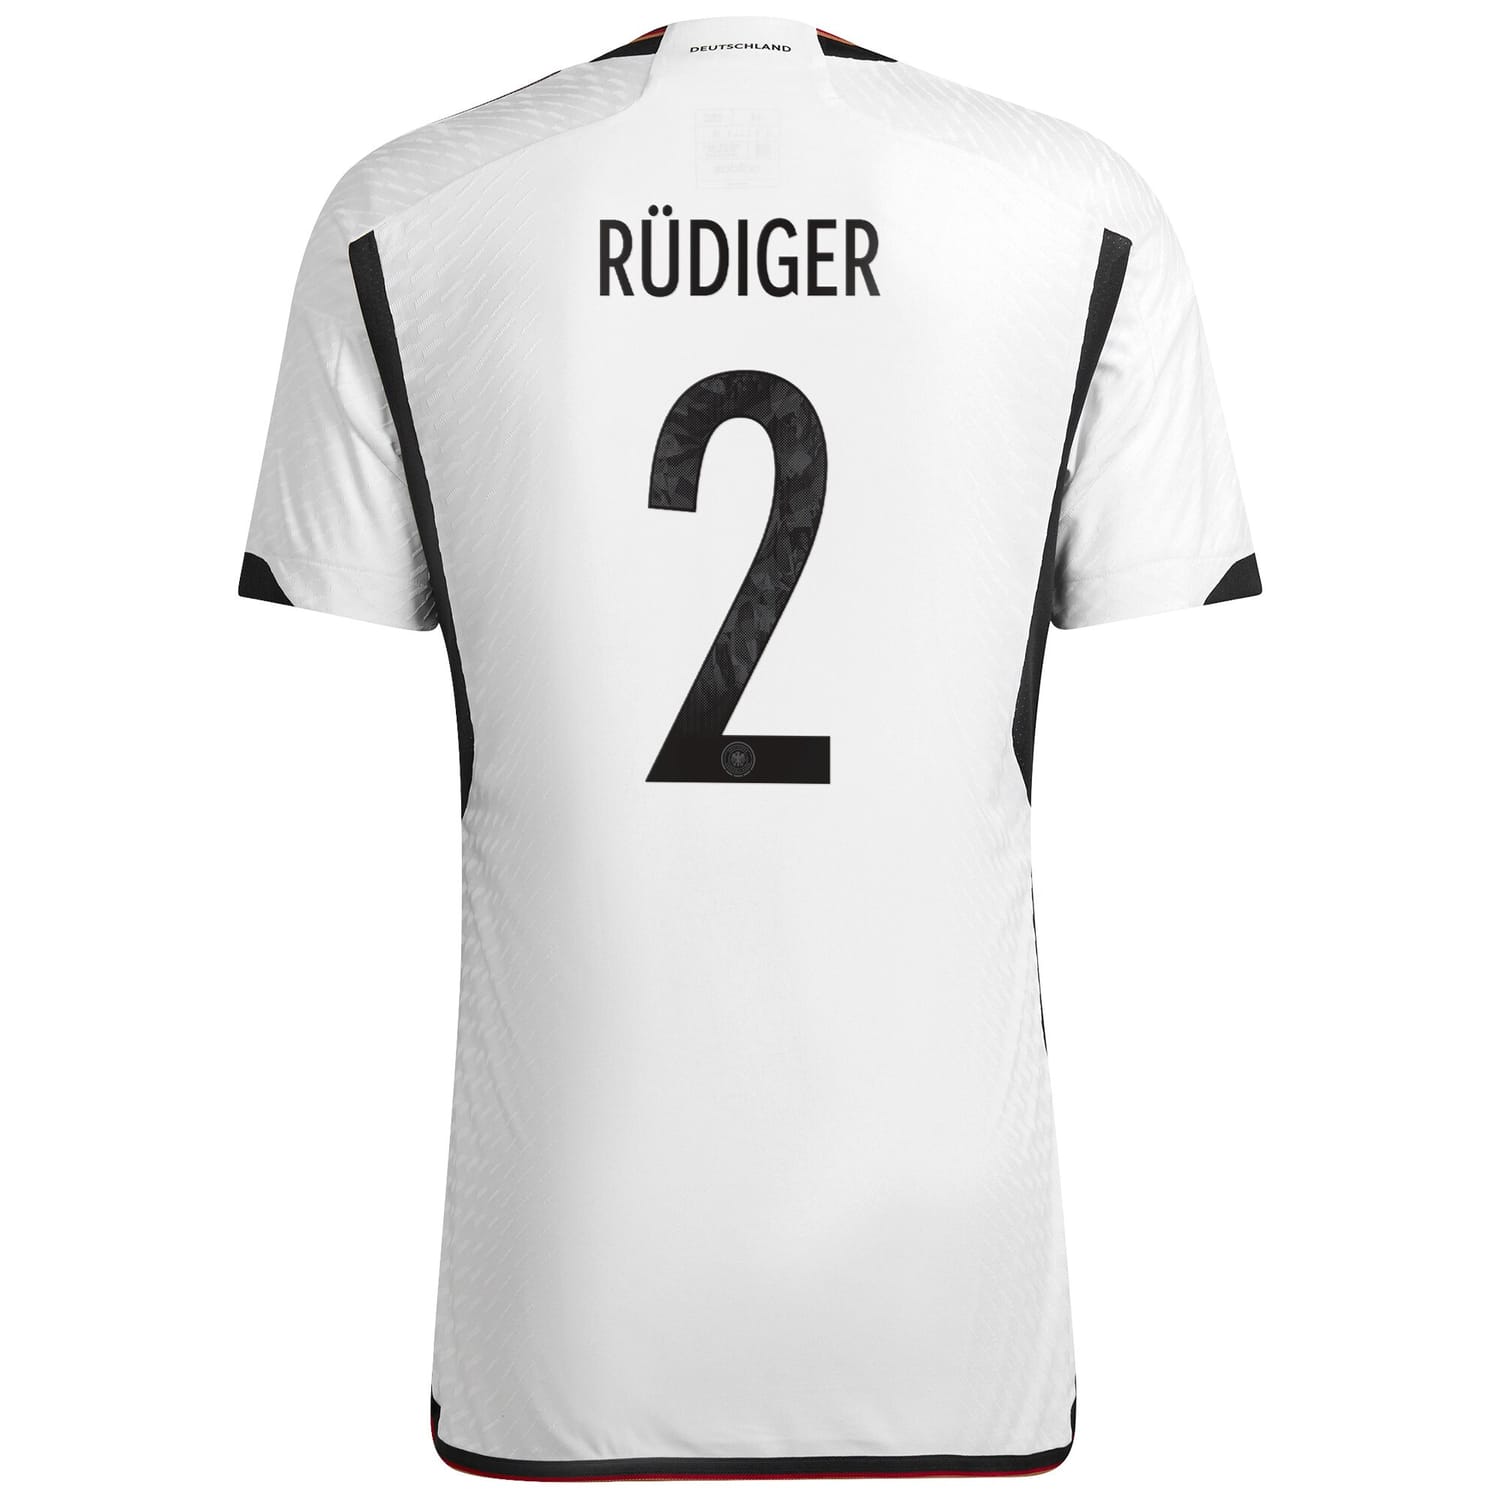 Germany National Team Home Authentic Jersey Shirt player Antonio Rüdiger 2 printing for Men